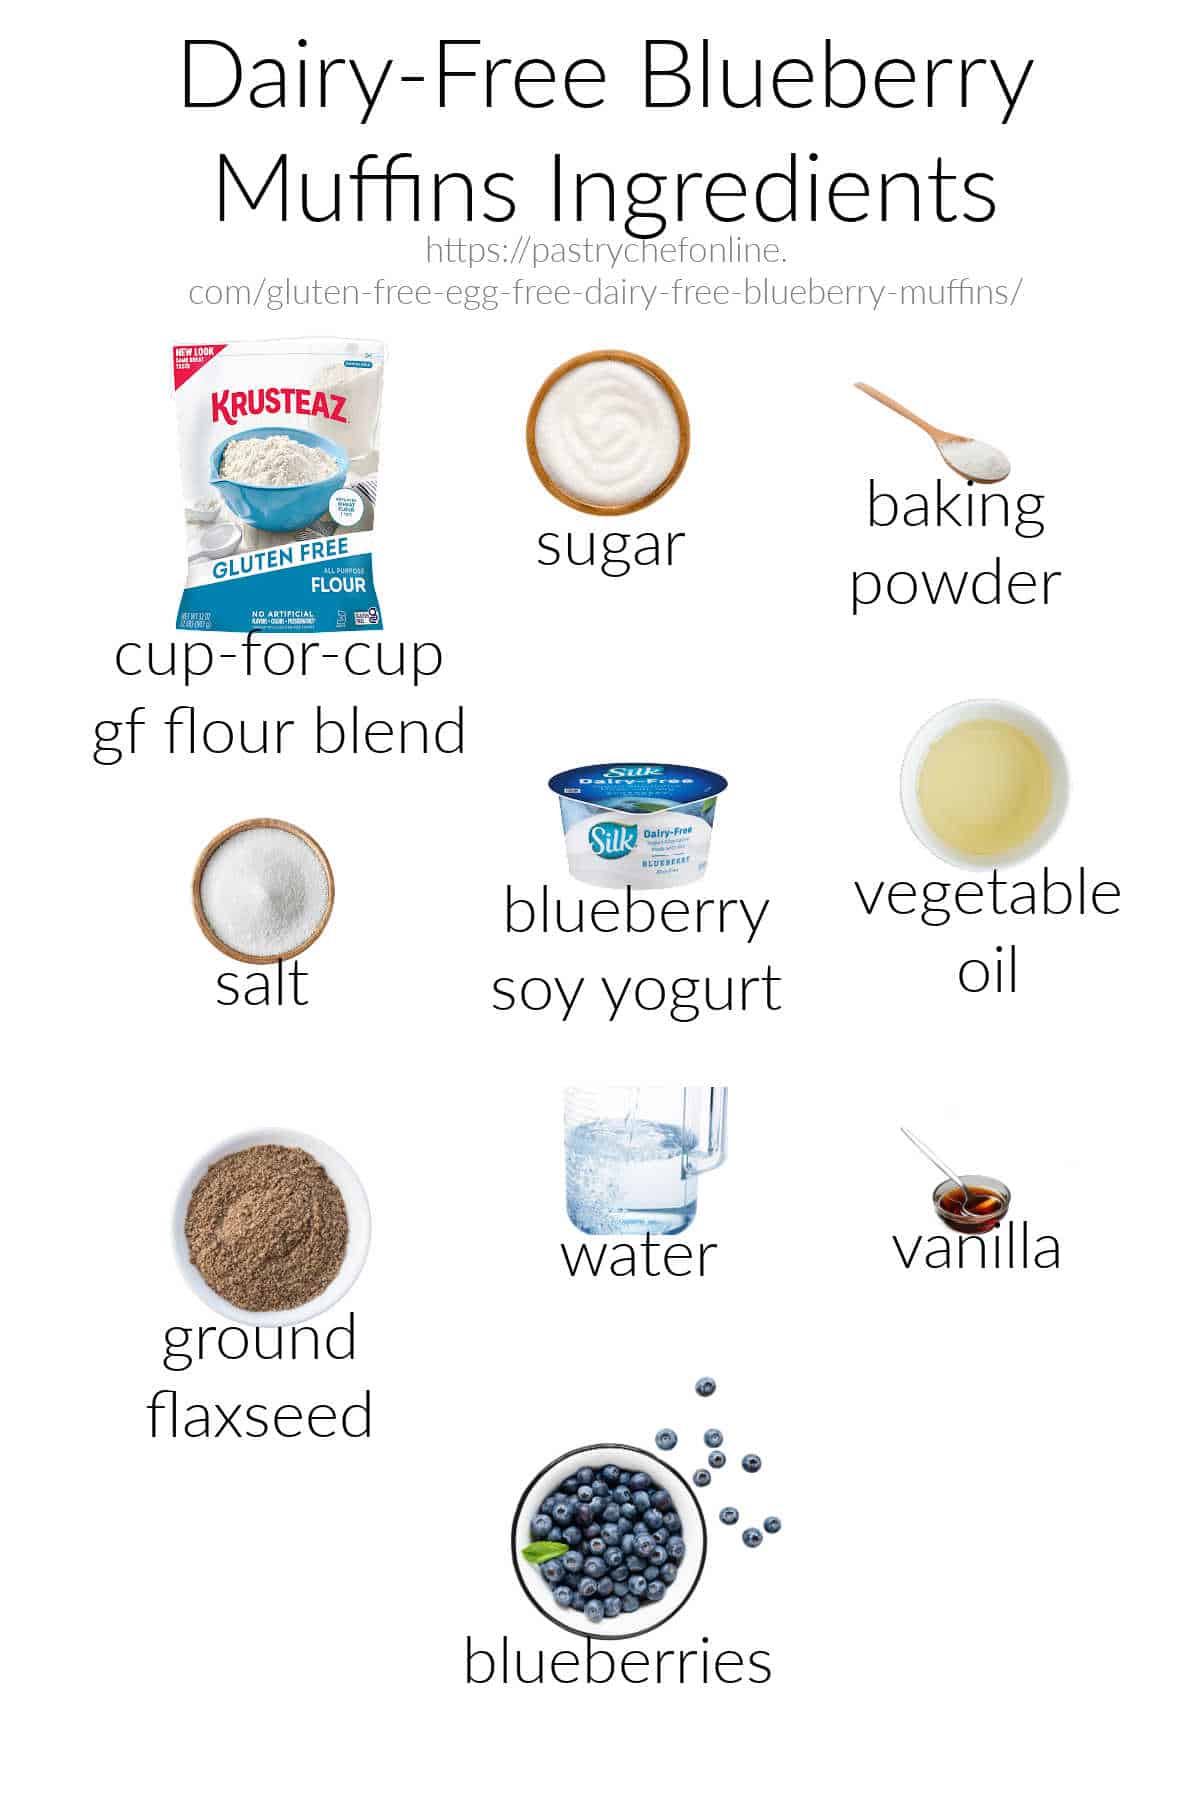 Images of all the ingredients to make dairy free blueberry muffins, labeled and photographed on a white background.